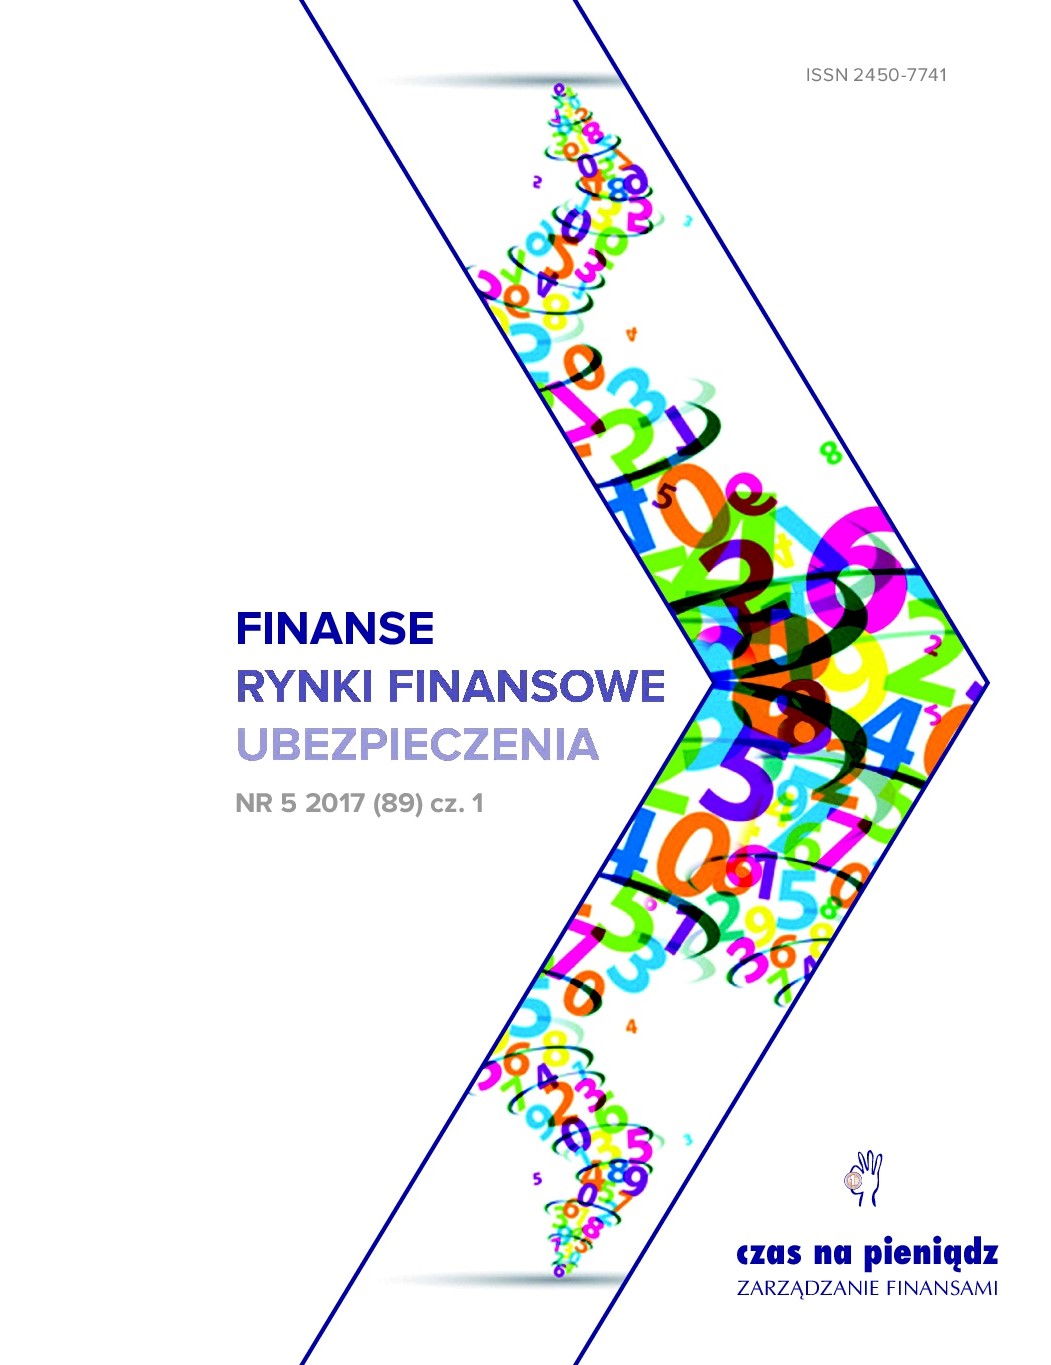 Loan loss provisions in Polish banking sector Cover Image